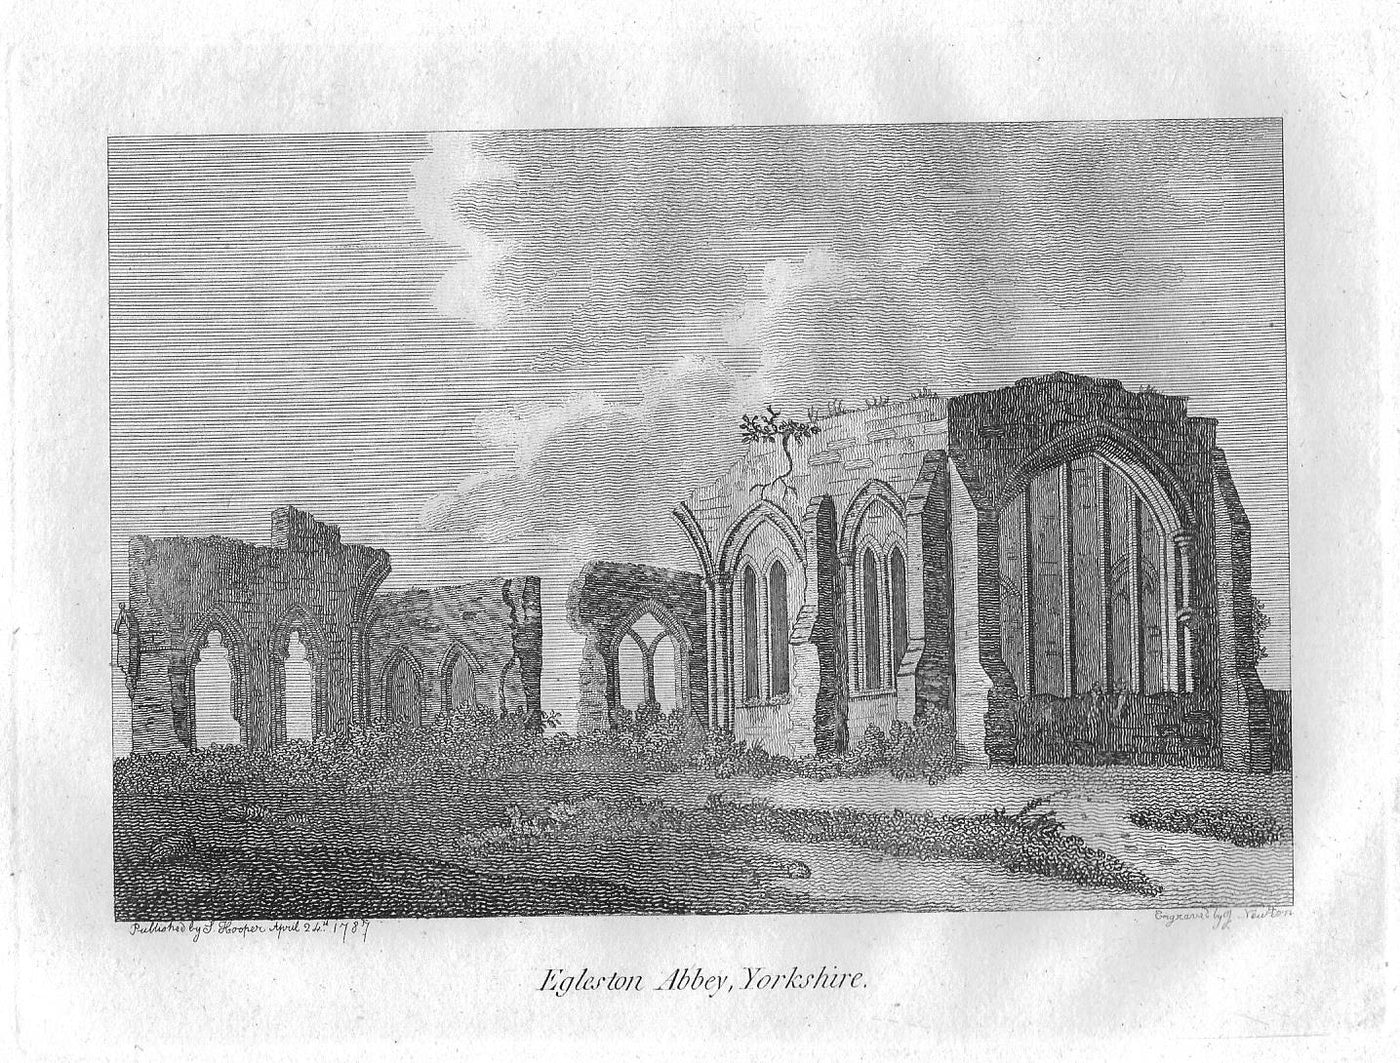 Egglestone Abbey Yorkshire antique print by Francis Grose dated 1787